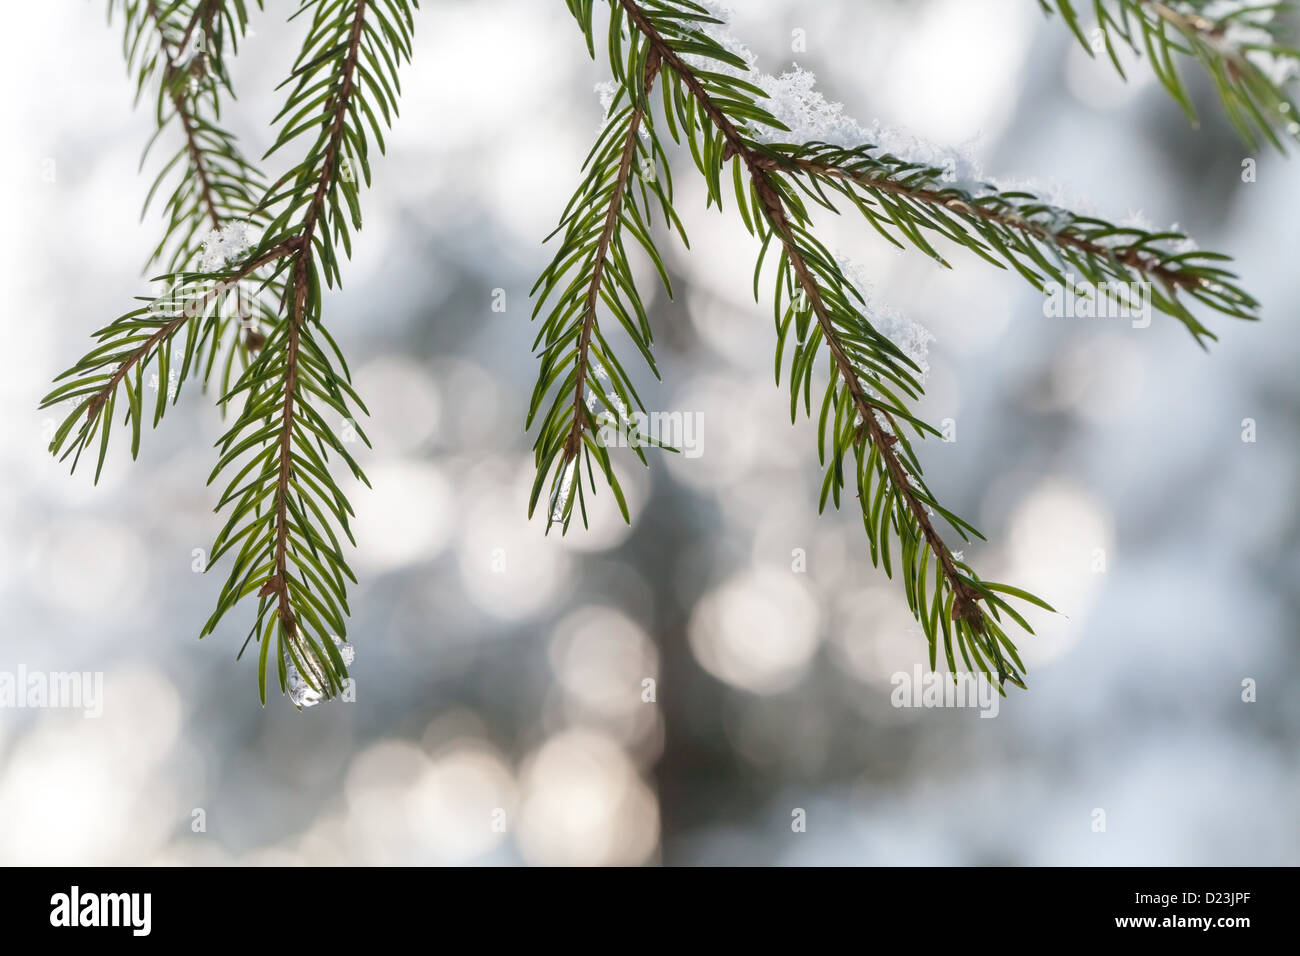 Fir tree branches with snowflakes and frozen water drops on it Stock Photo